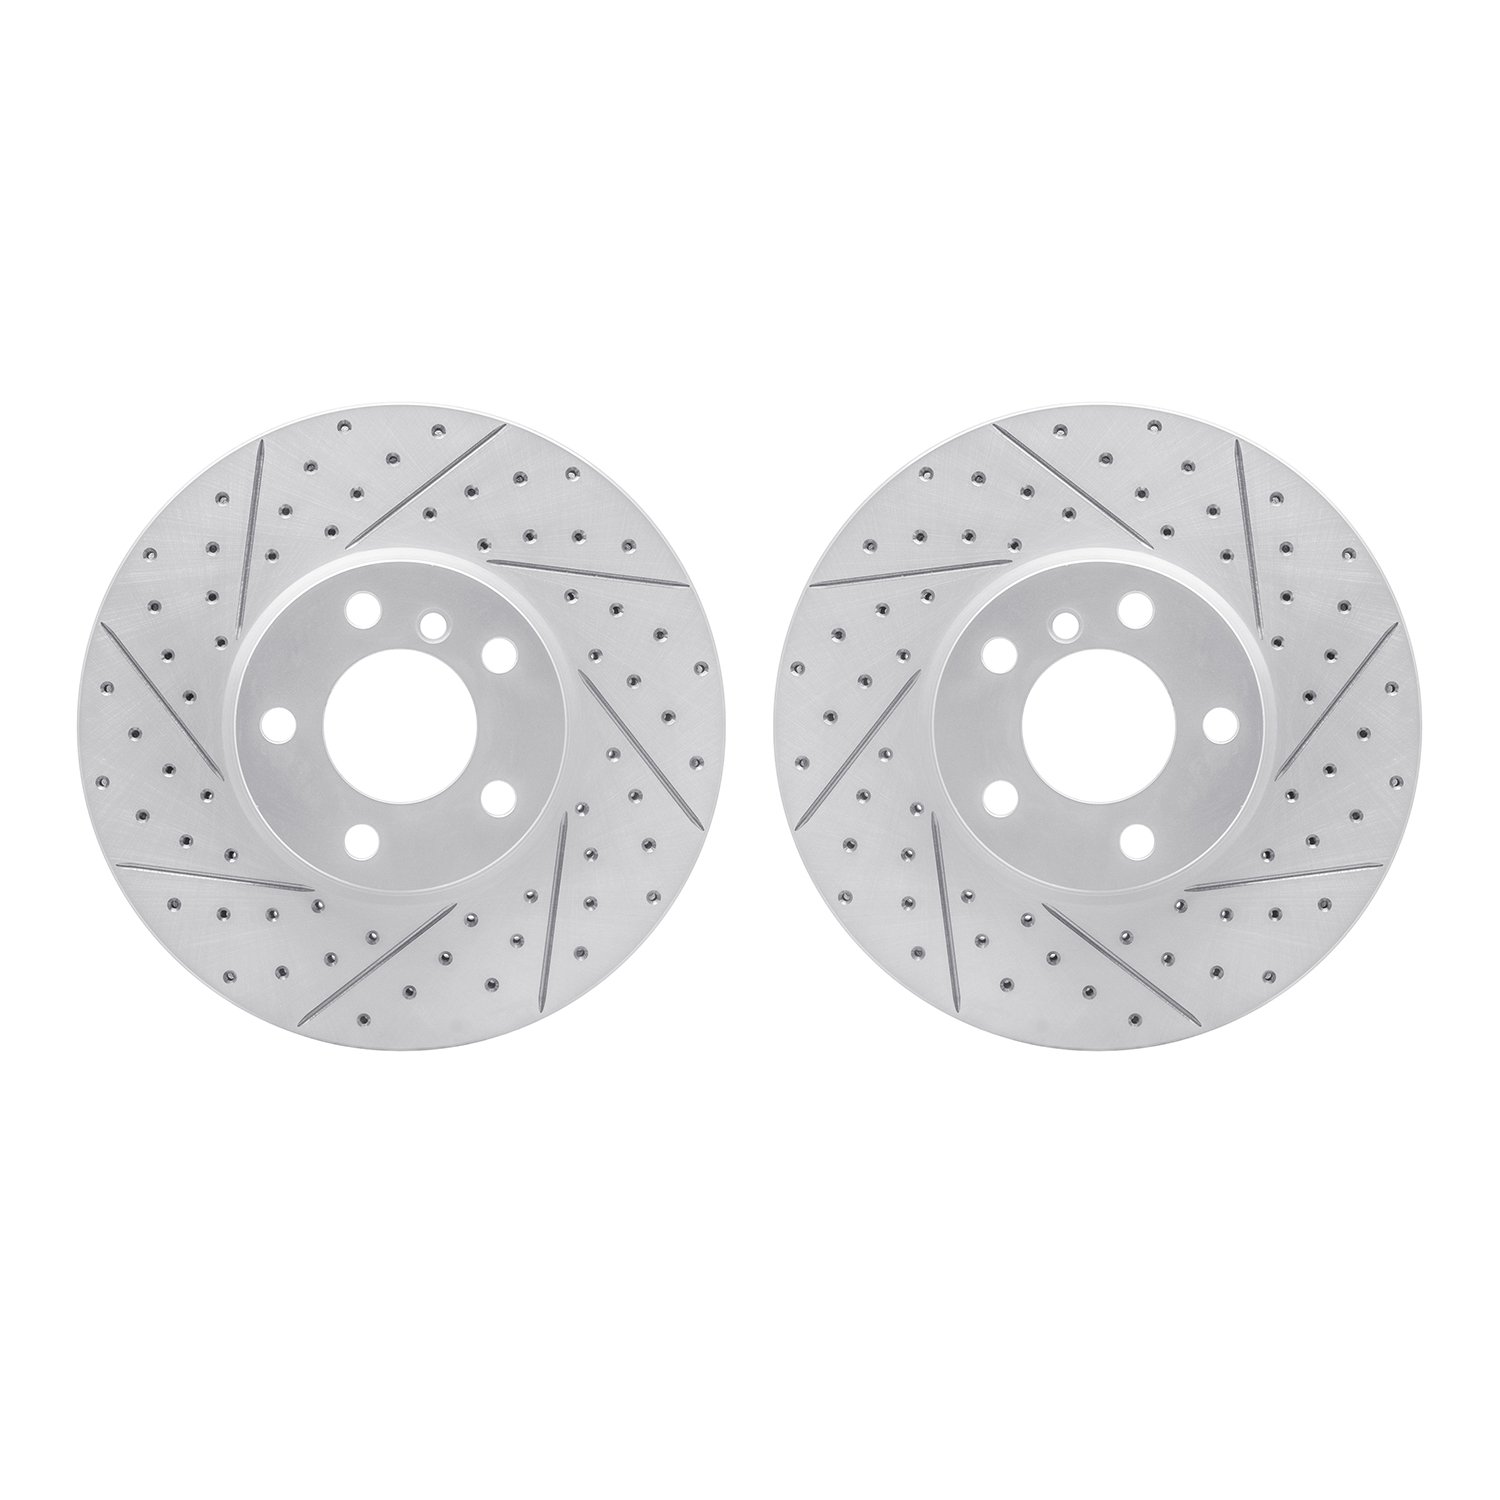 2002-31045 Geoperformance Drilled/Slotted Brake Rotors, 2007-2019 BMW, Position: Front